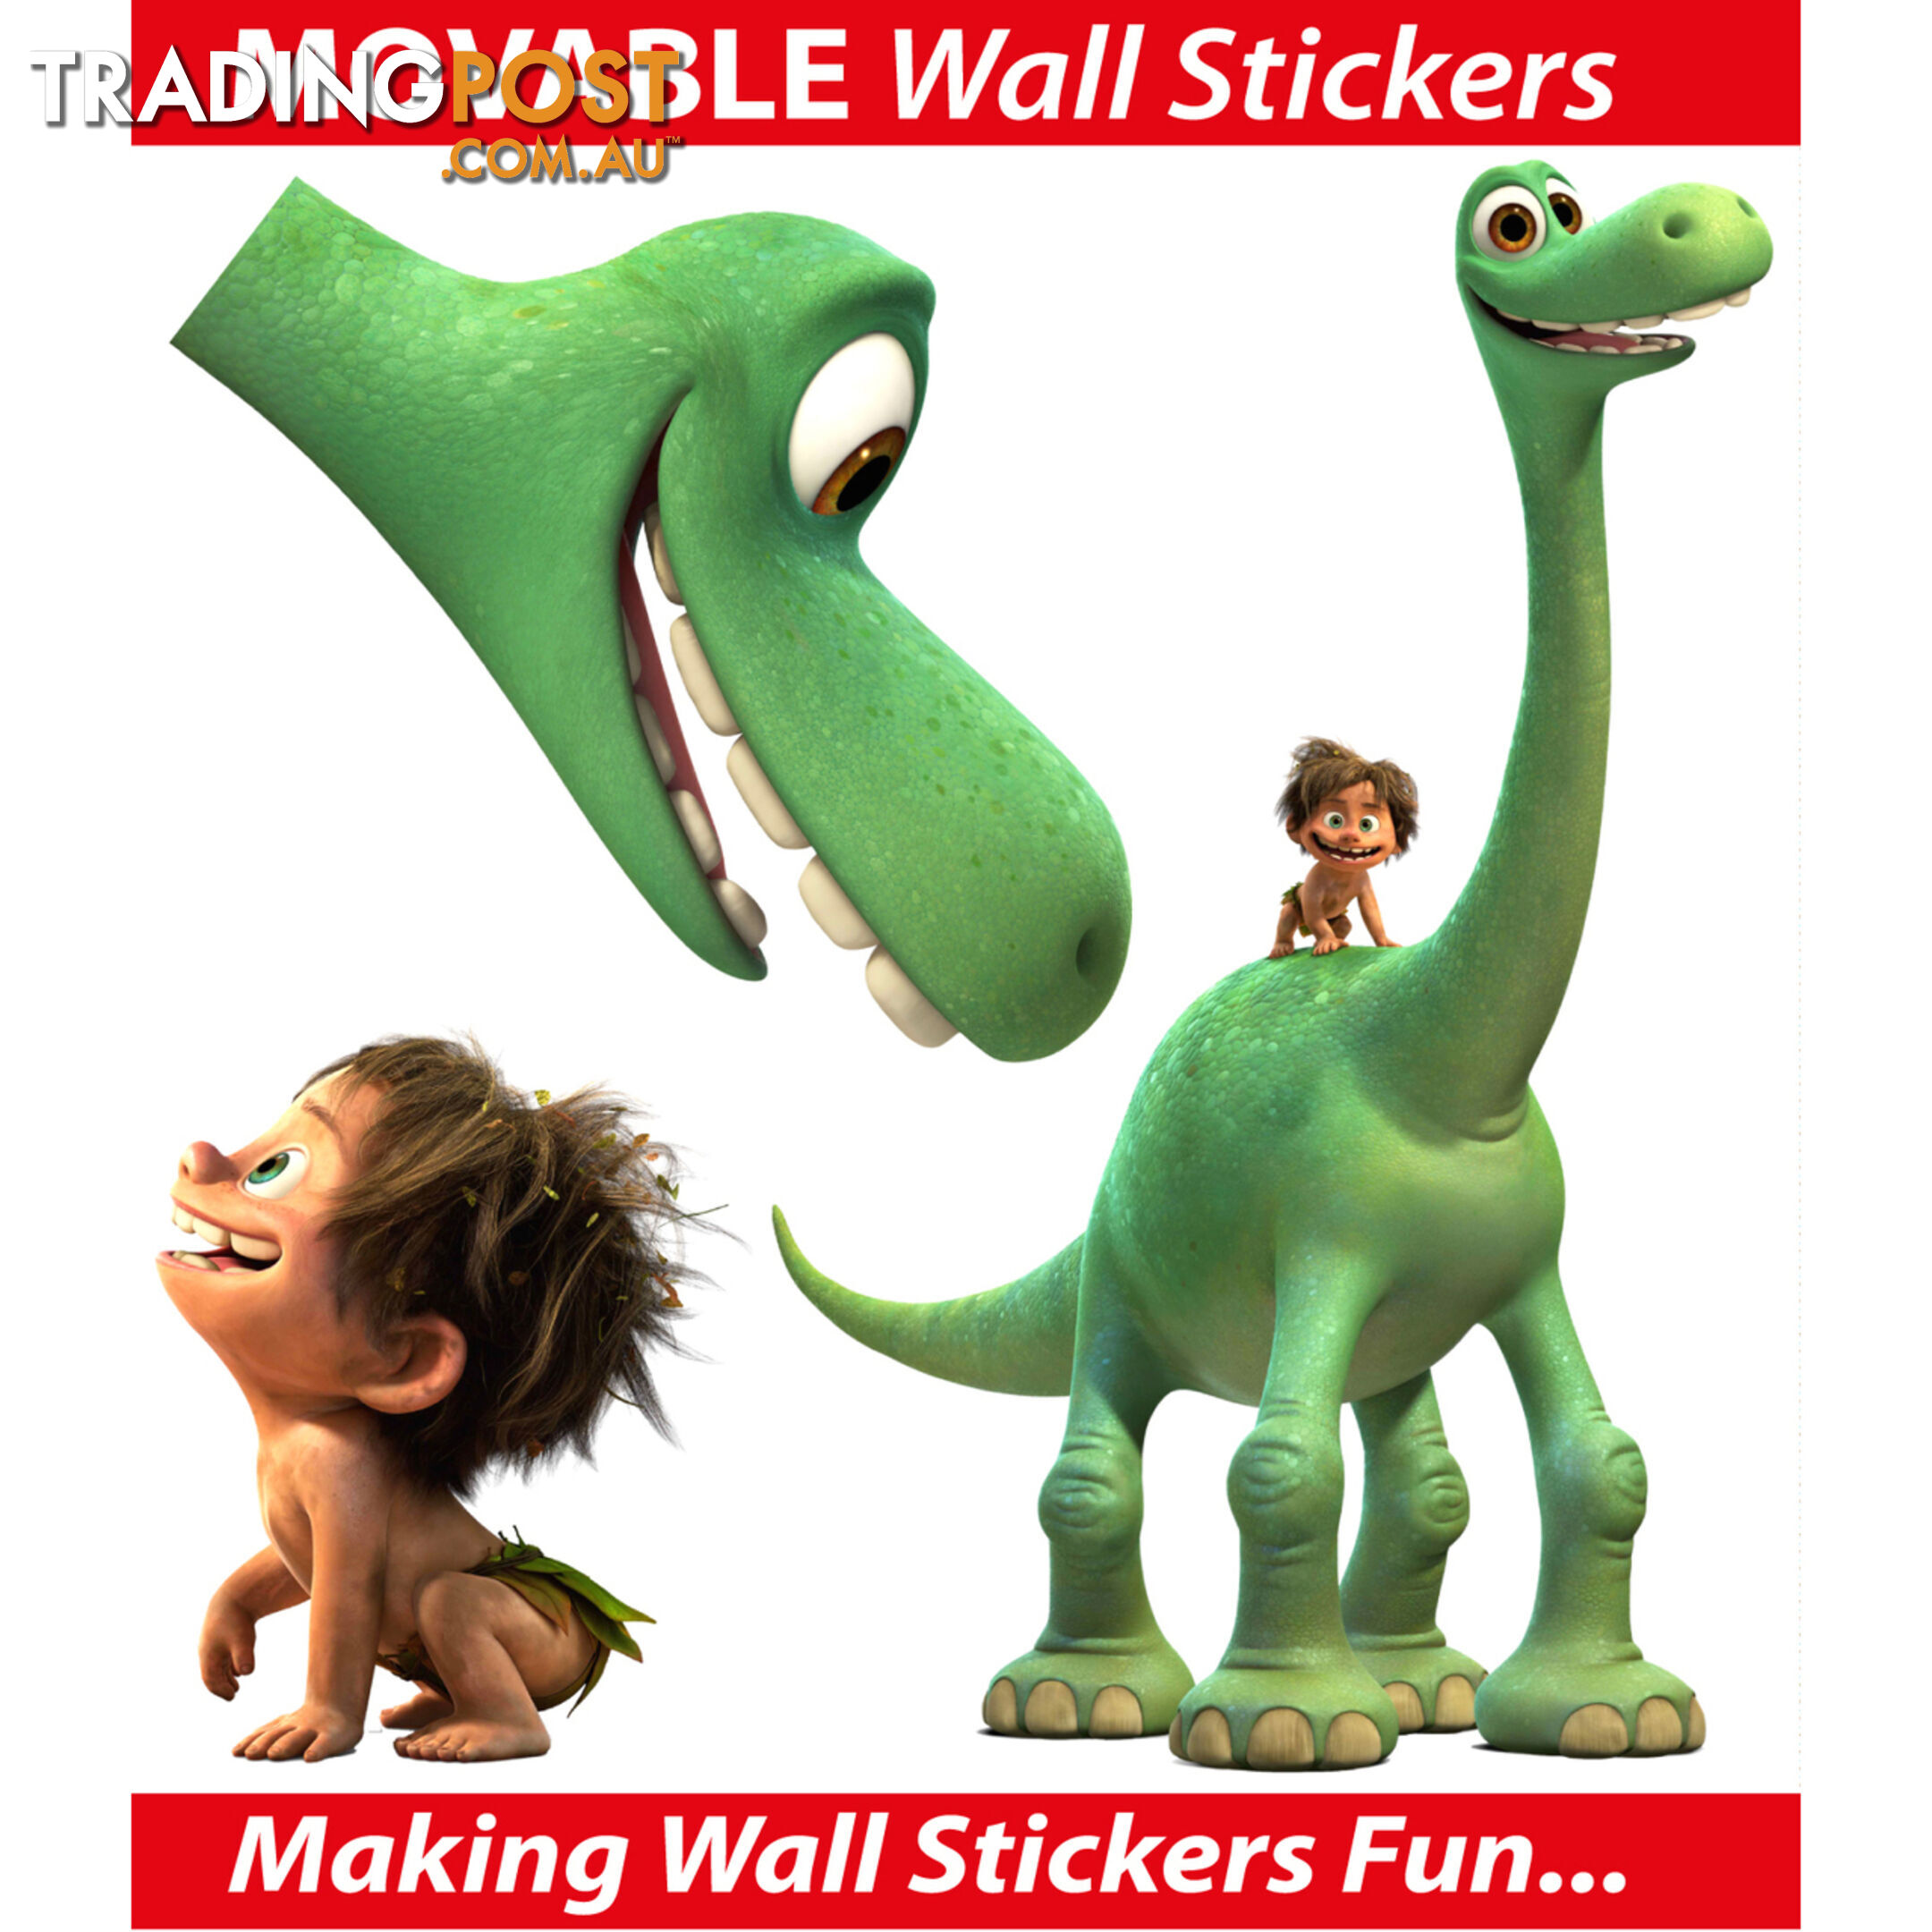 The Good Dinosaur MOVABLE and Reusable Toy box - Wall Stickers